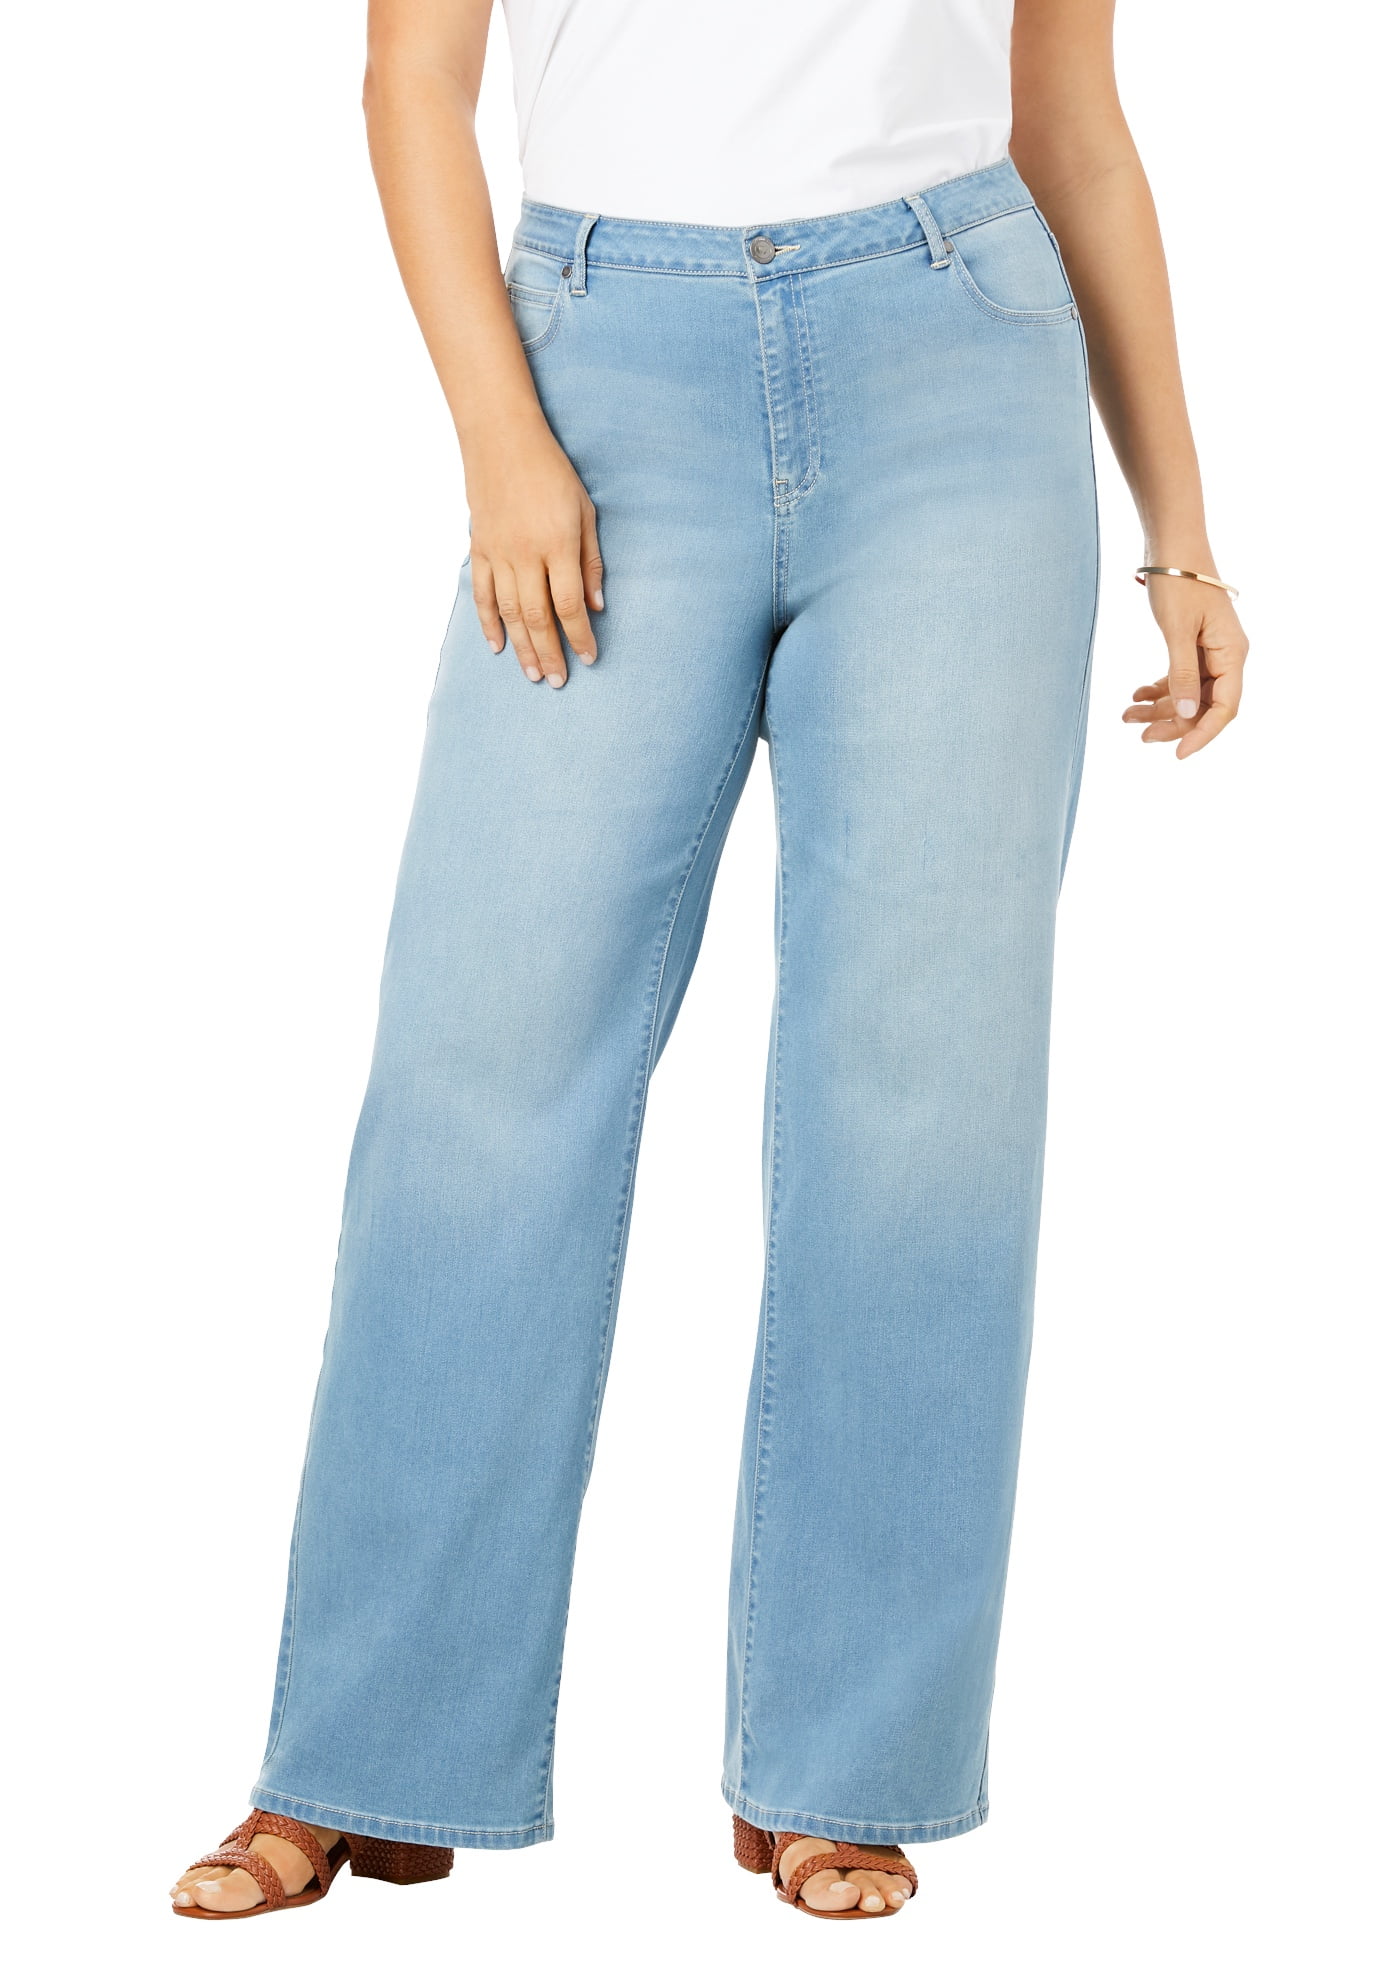 soft comfortable jeans